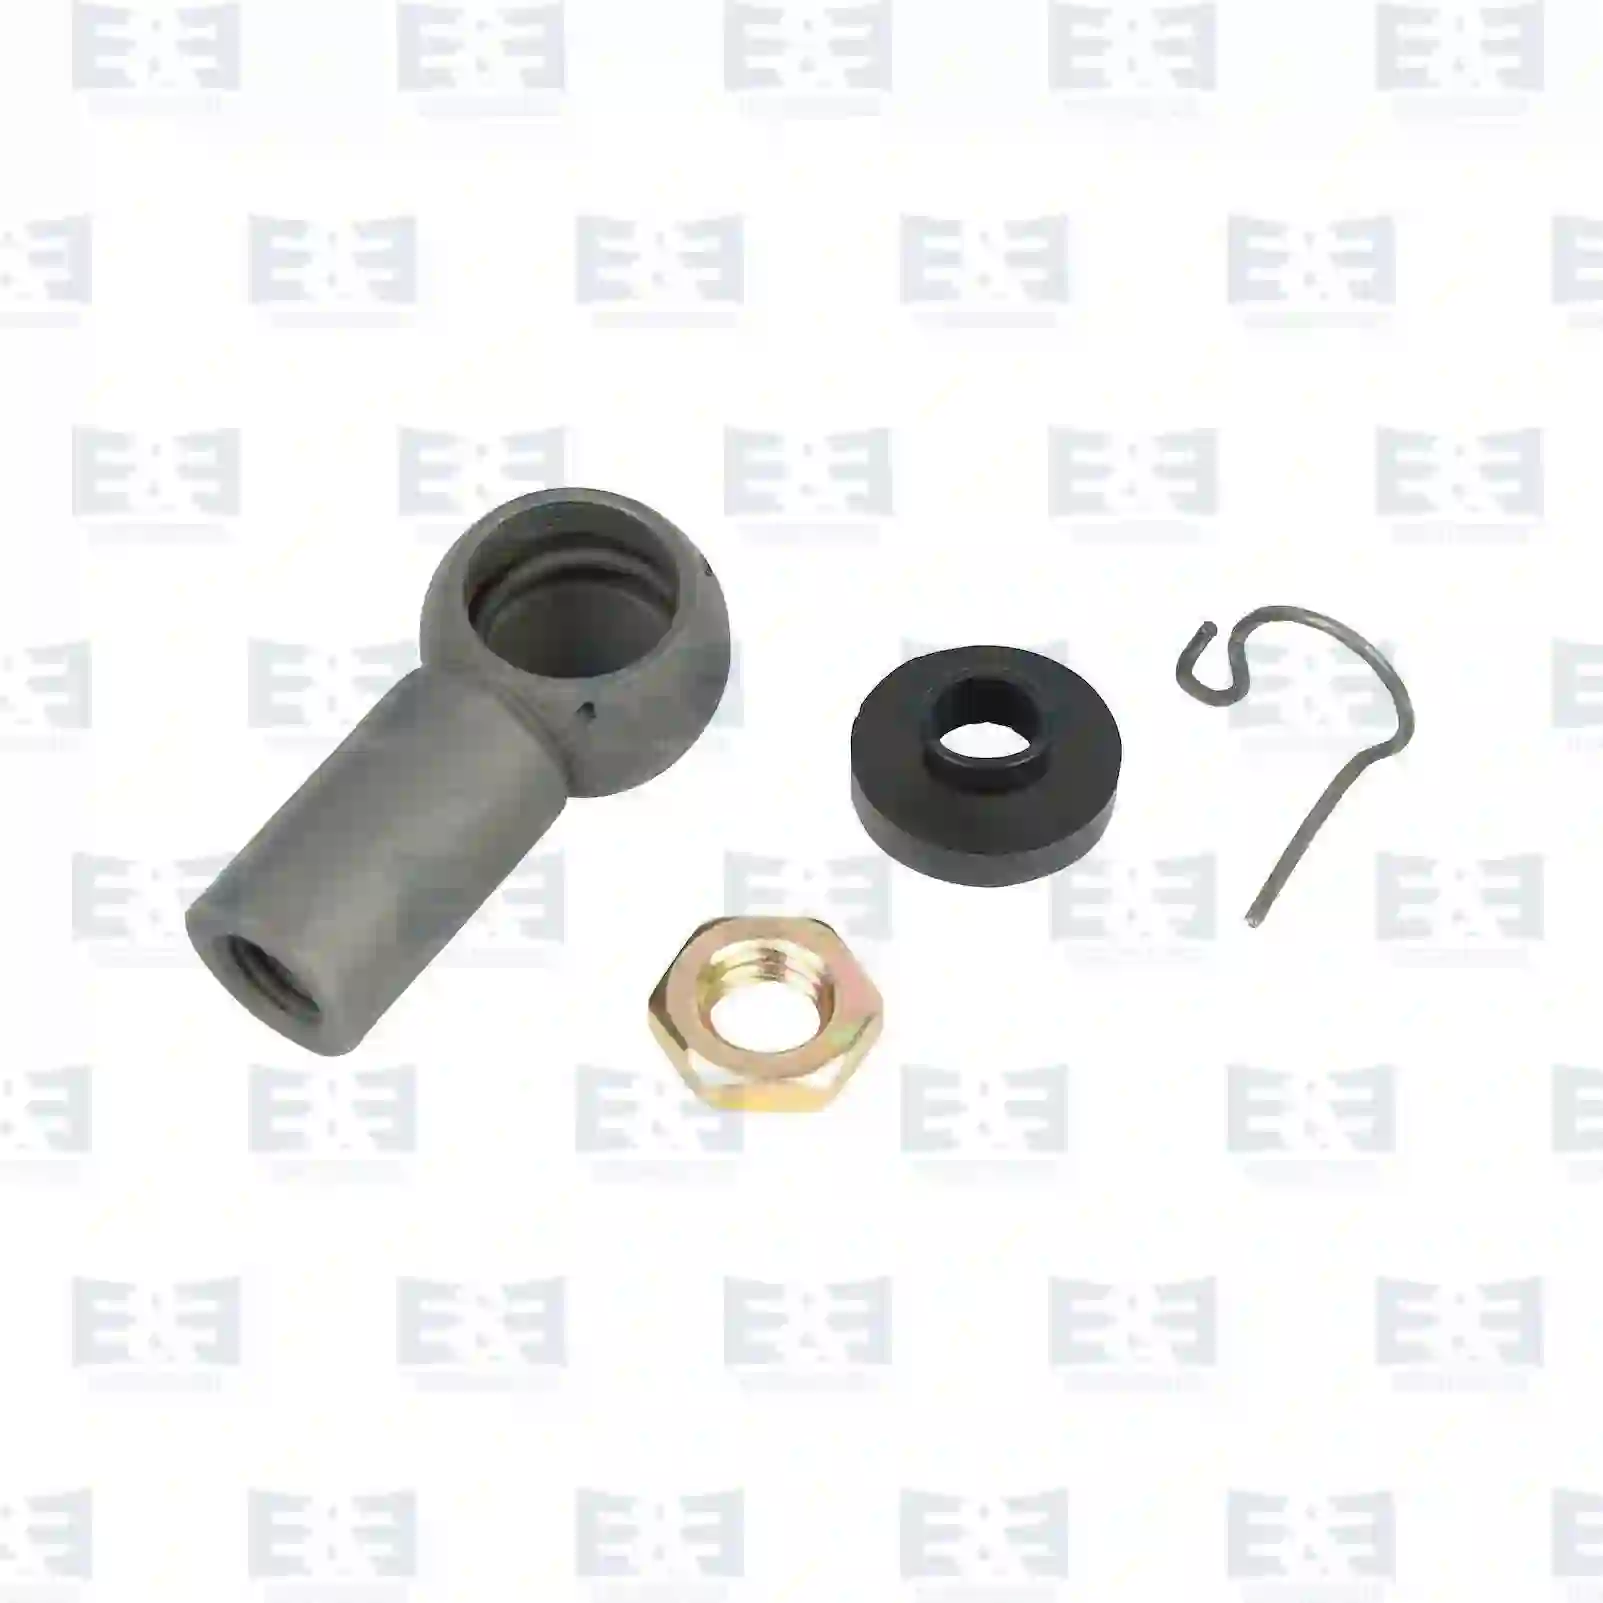 Repair kit, working cylinder, 2E2206358, 1112539S1, ZG50694-0008 ||  2E2206358 E&E Truck Spare Parts | Truck Spare Parts, Auotomotive Spare Parts Repair kit, working cylinder, 2E2206358, 1112539S1, ZG50694-0008 ||  2E2206358 E&E Truck Spare Parts | Truck Spare Parts, Auotomotive Spare Parts